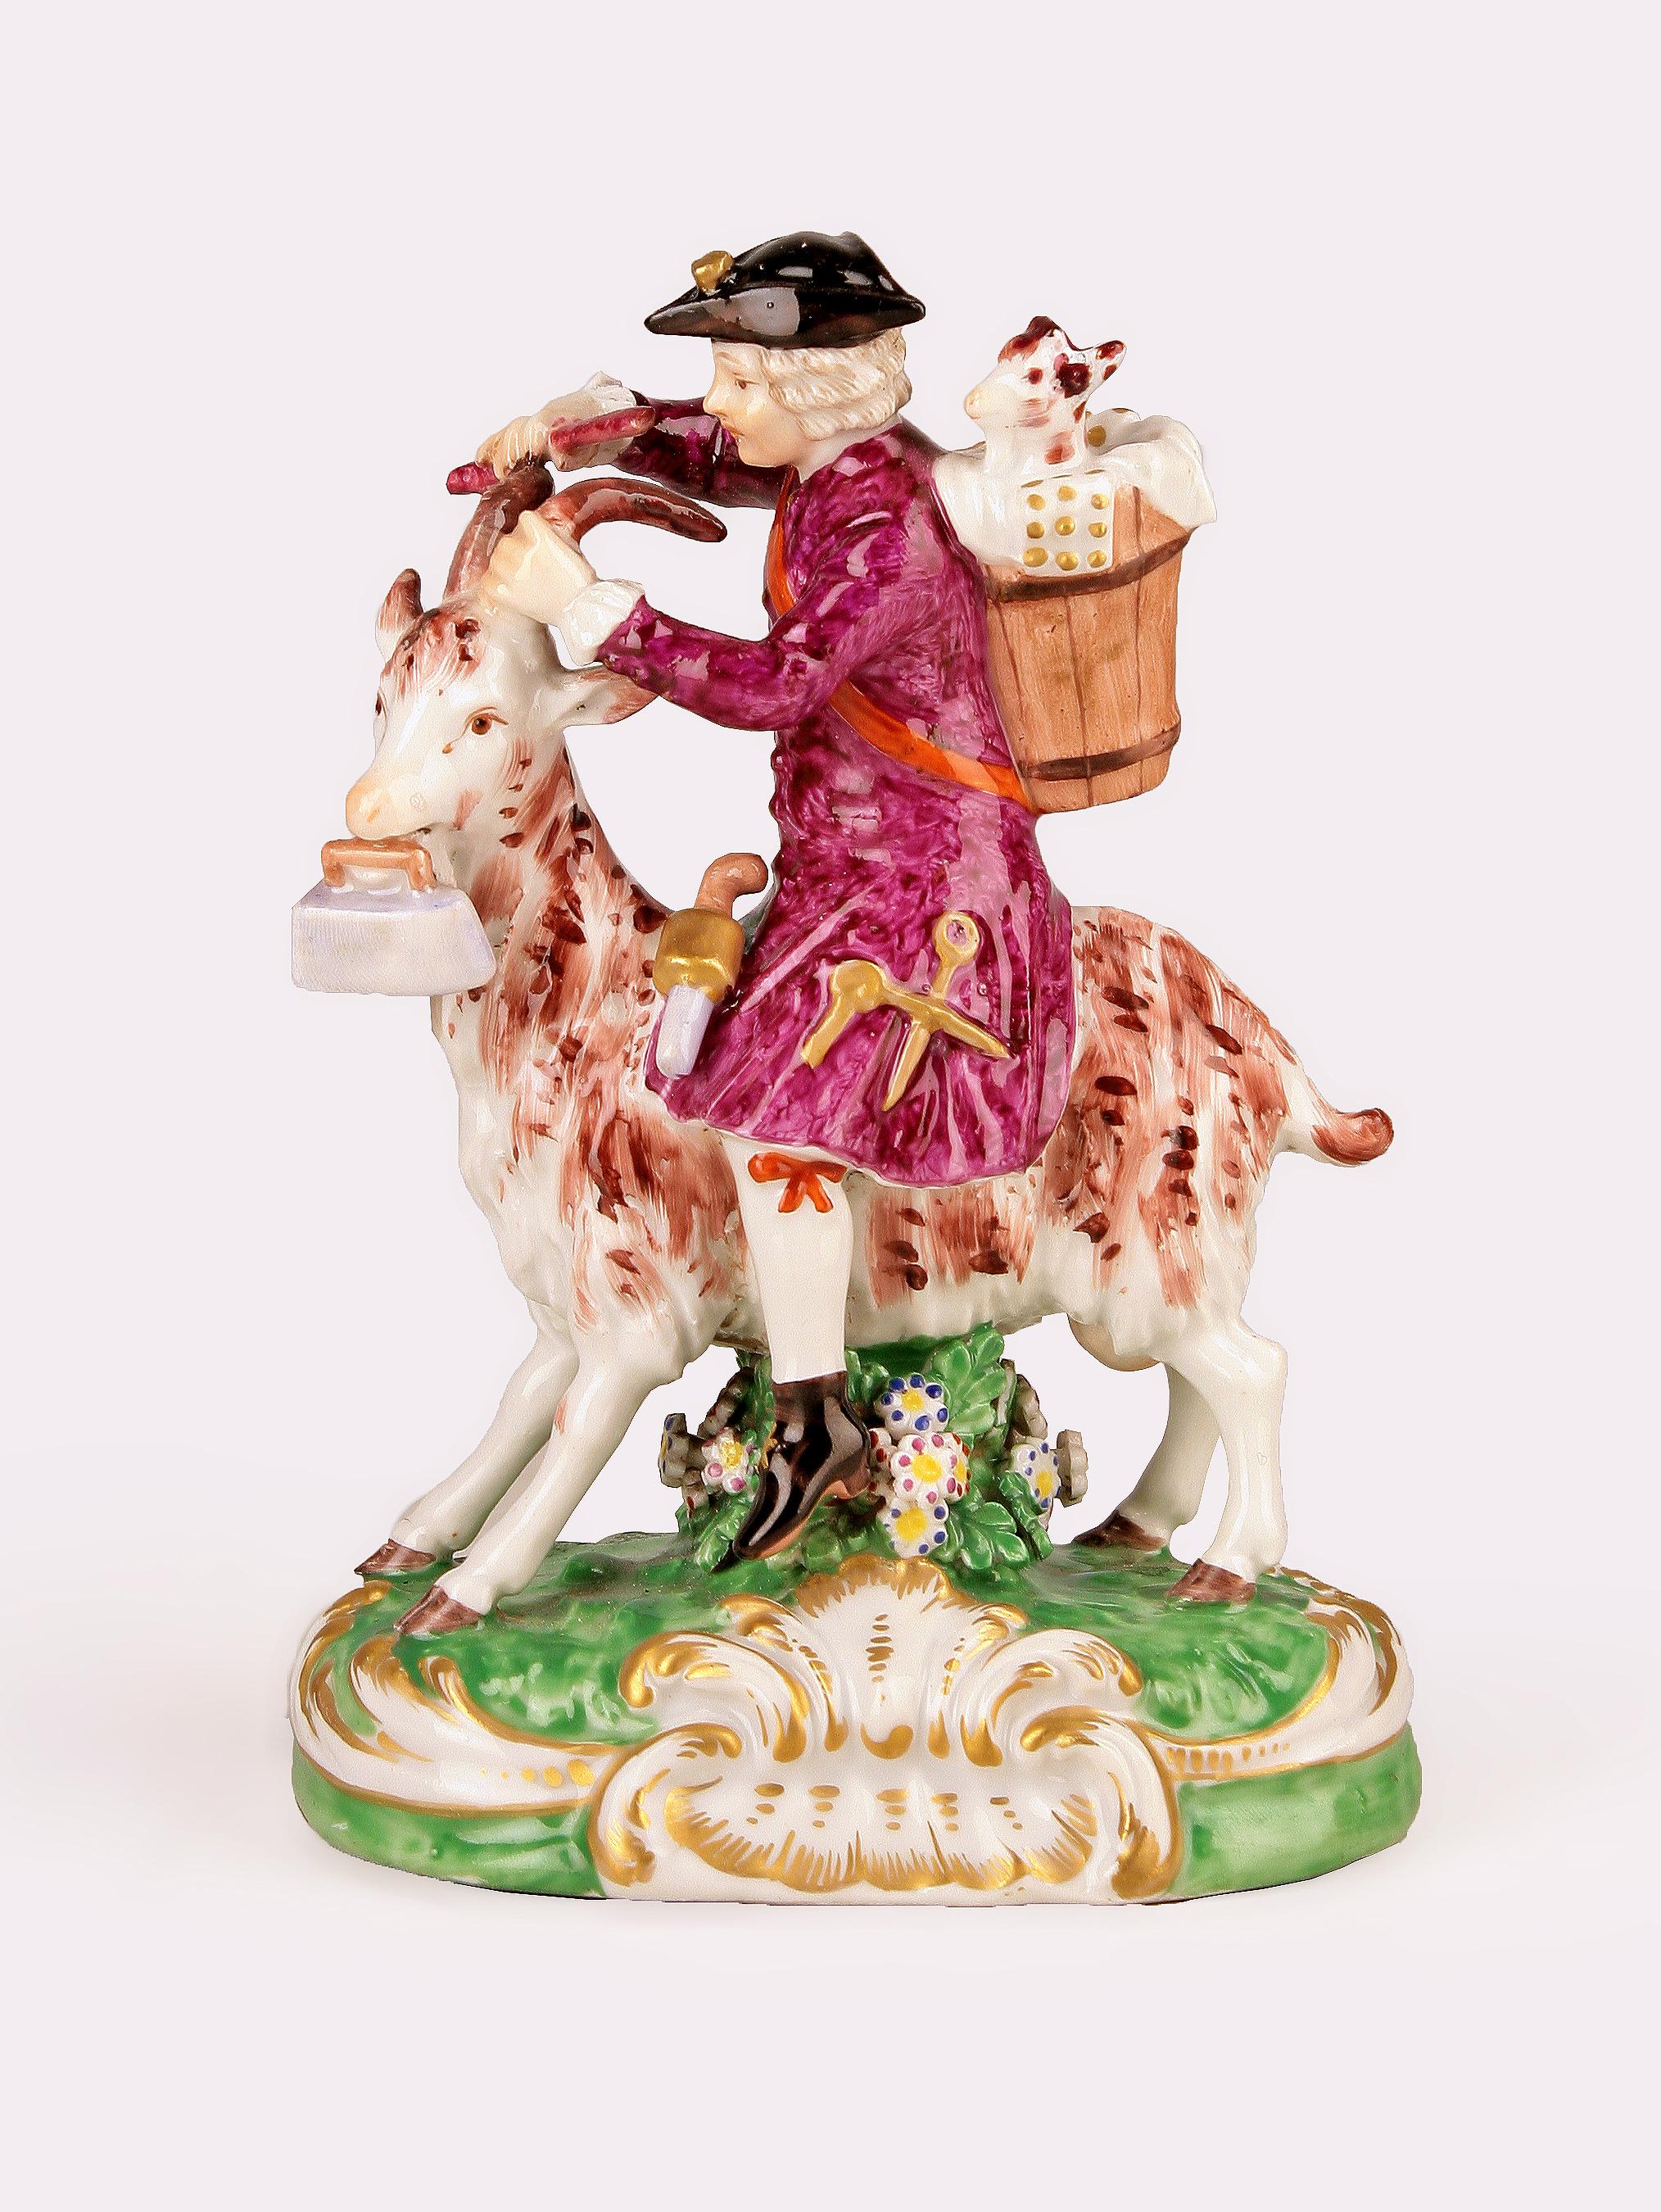 18th century Baroque/Rococo english glazed painted porcelain of a goat-riding tailor by Chelsea Pottery

By: Chelsea Pottery, Meissen Porcelain (in the style of)
Material: porcelain, ceramic, paint, enamel
Technique: pressed, molded, painted,